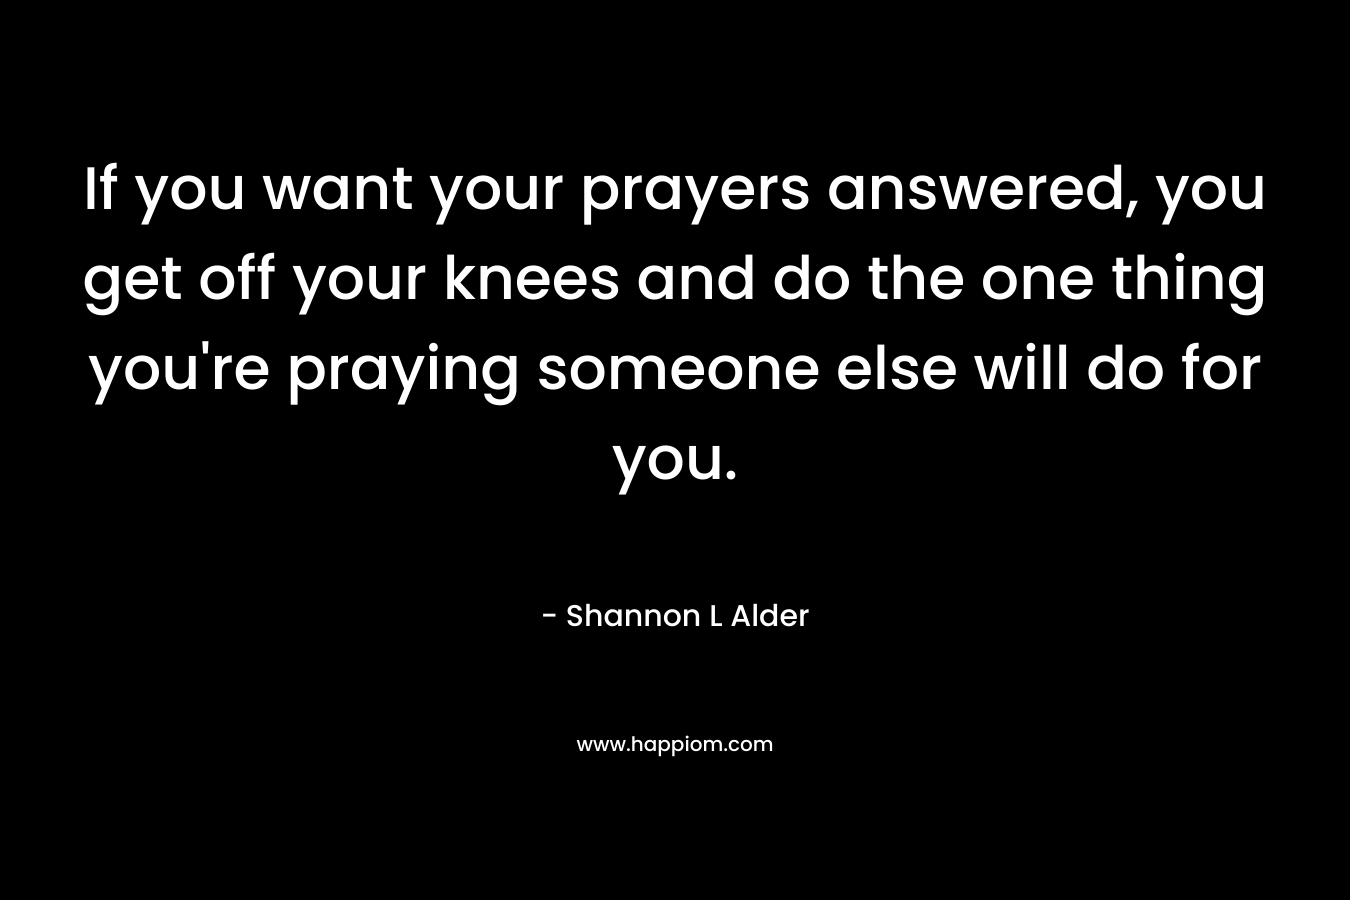 If you want your prayers answered, you get off your knees and do the one thing you're praying someone else will do for you.